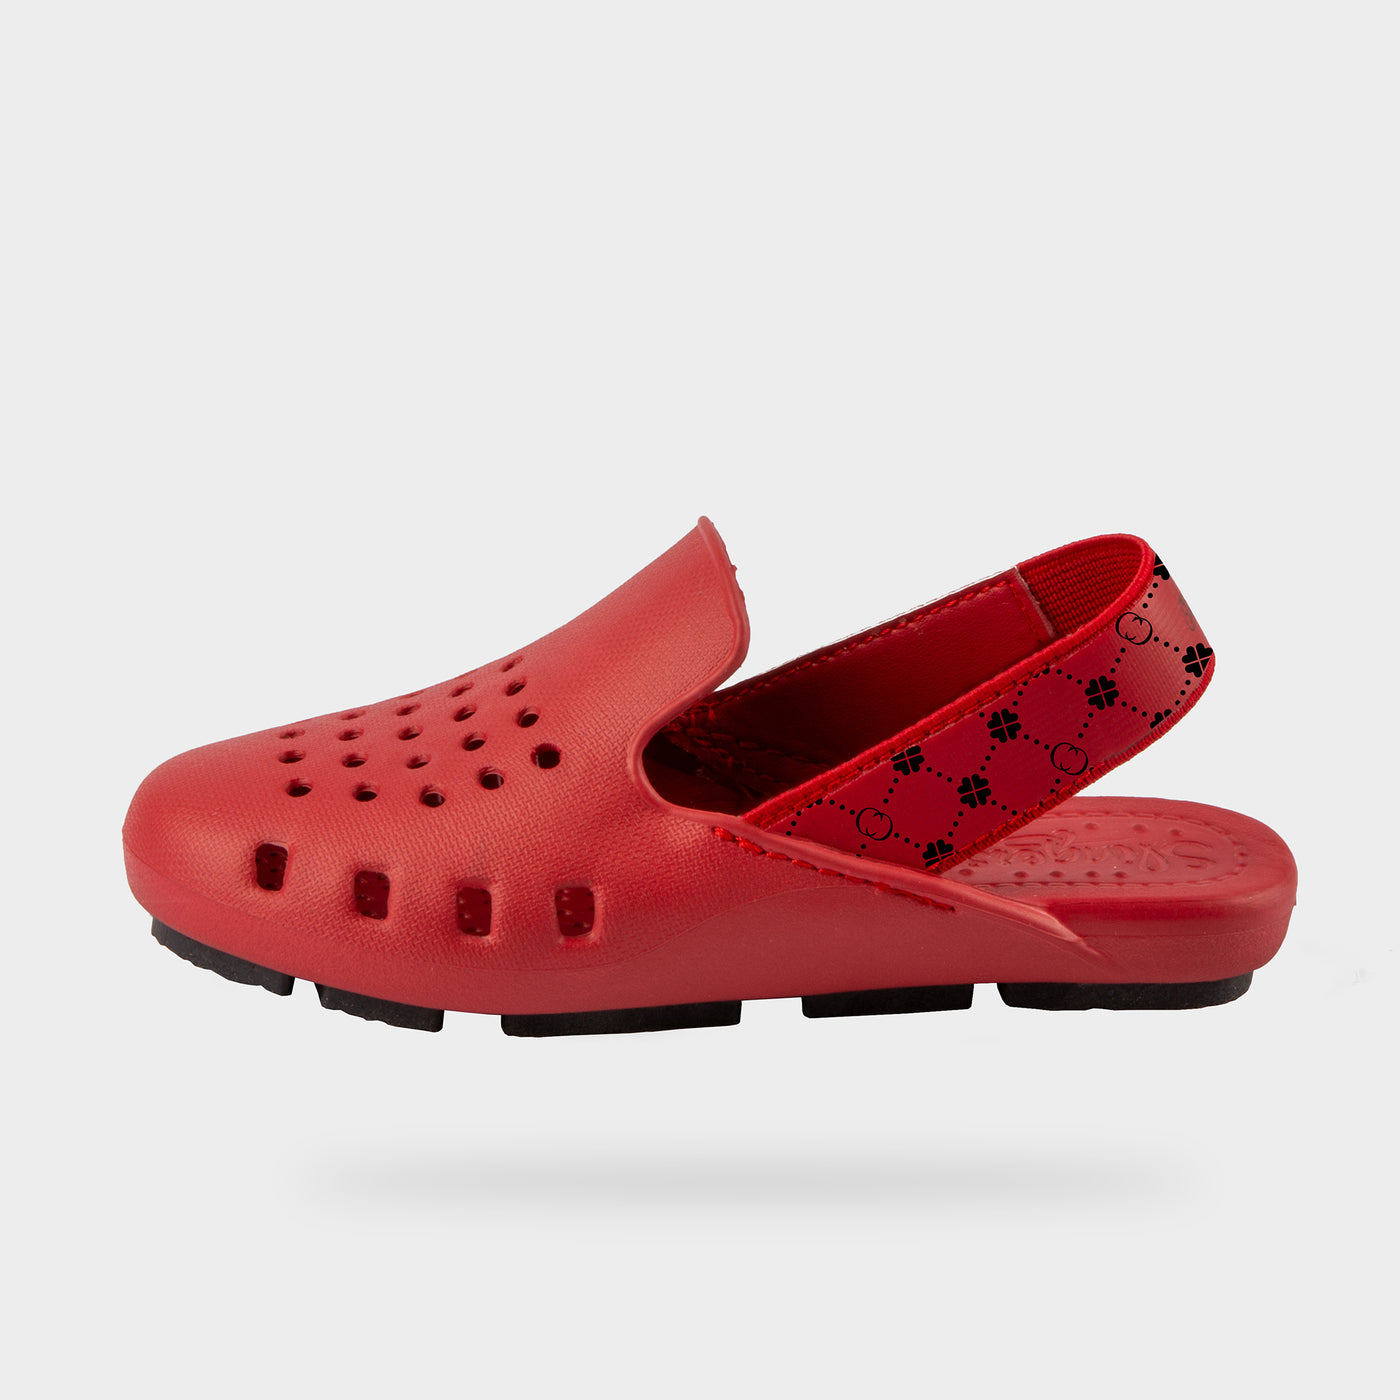 Slingers pretty girls water shoe in red. with back elastic sling back design